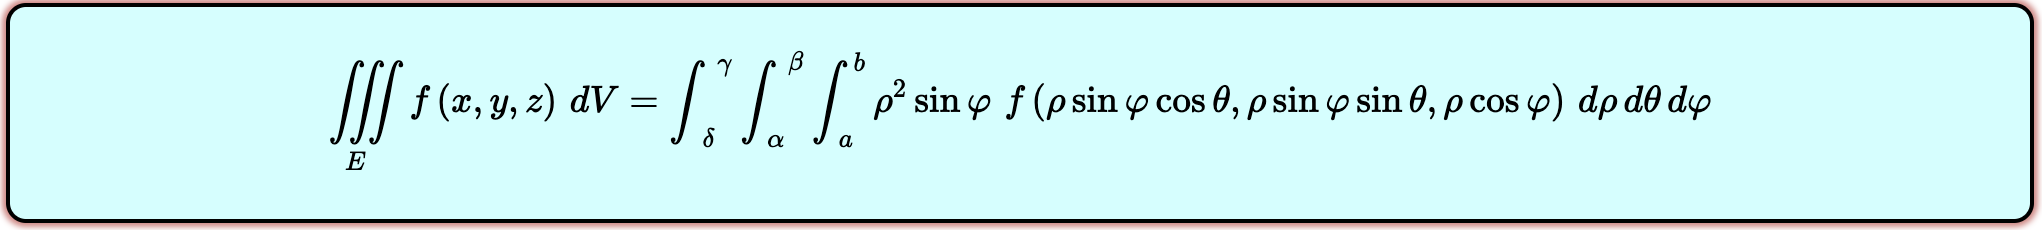 the integral on the right is much easier to solve for shapes like a circle or sphere